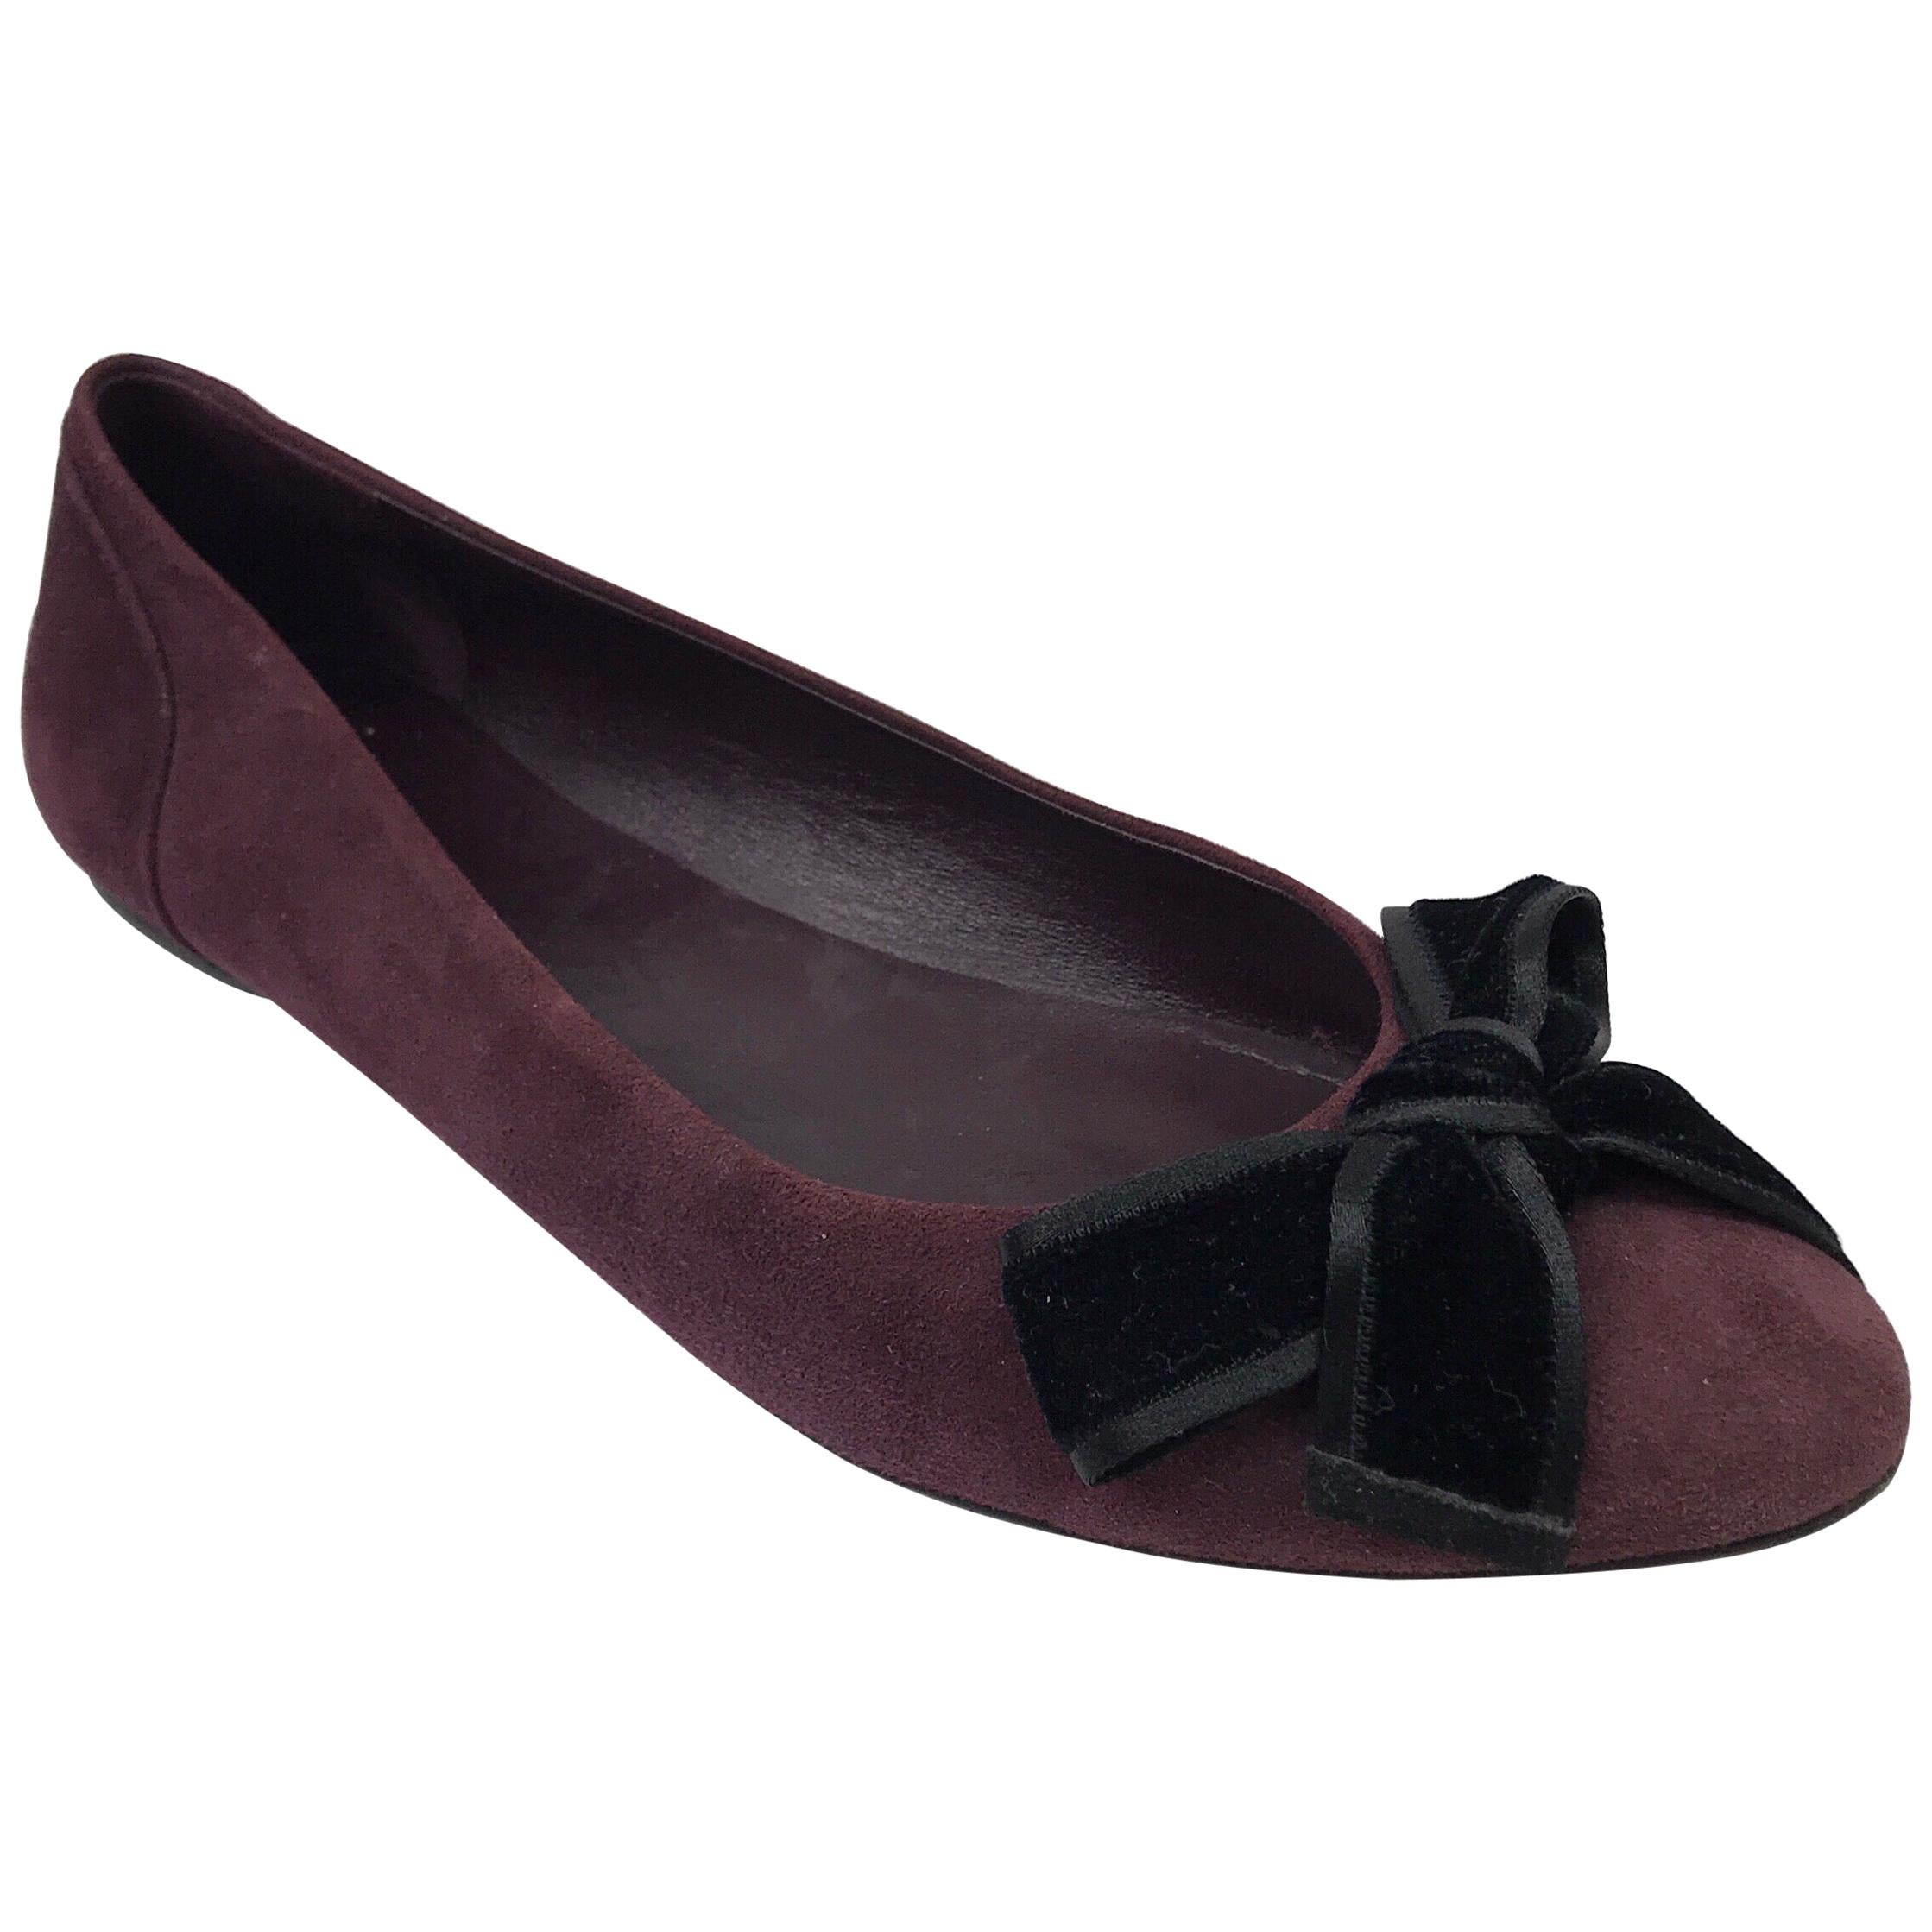 Gucci Viola Purple Suede Flats with Velvet Bow - 38.5